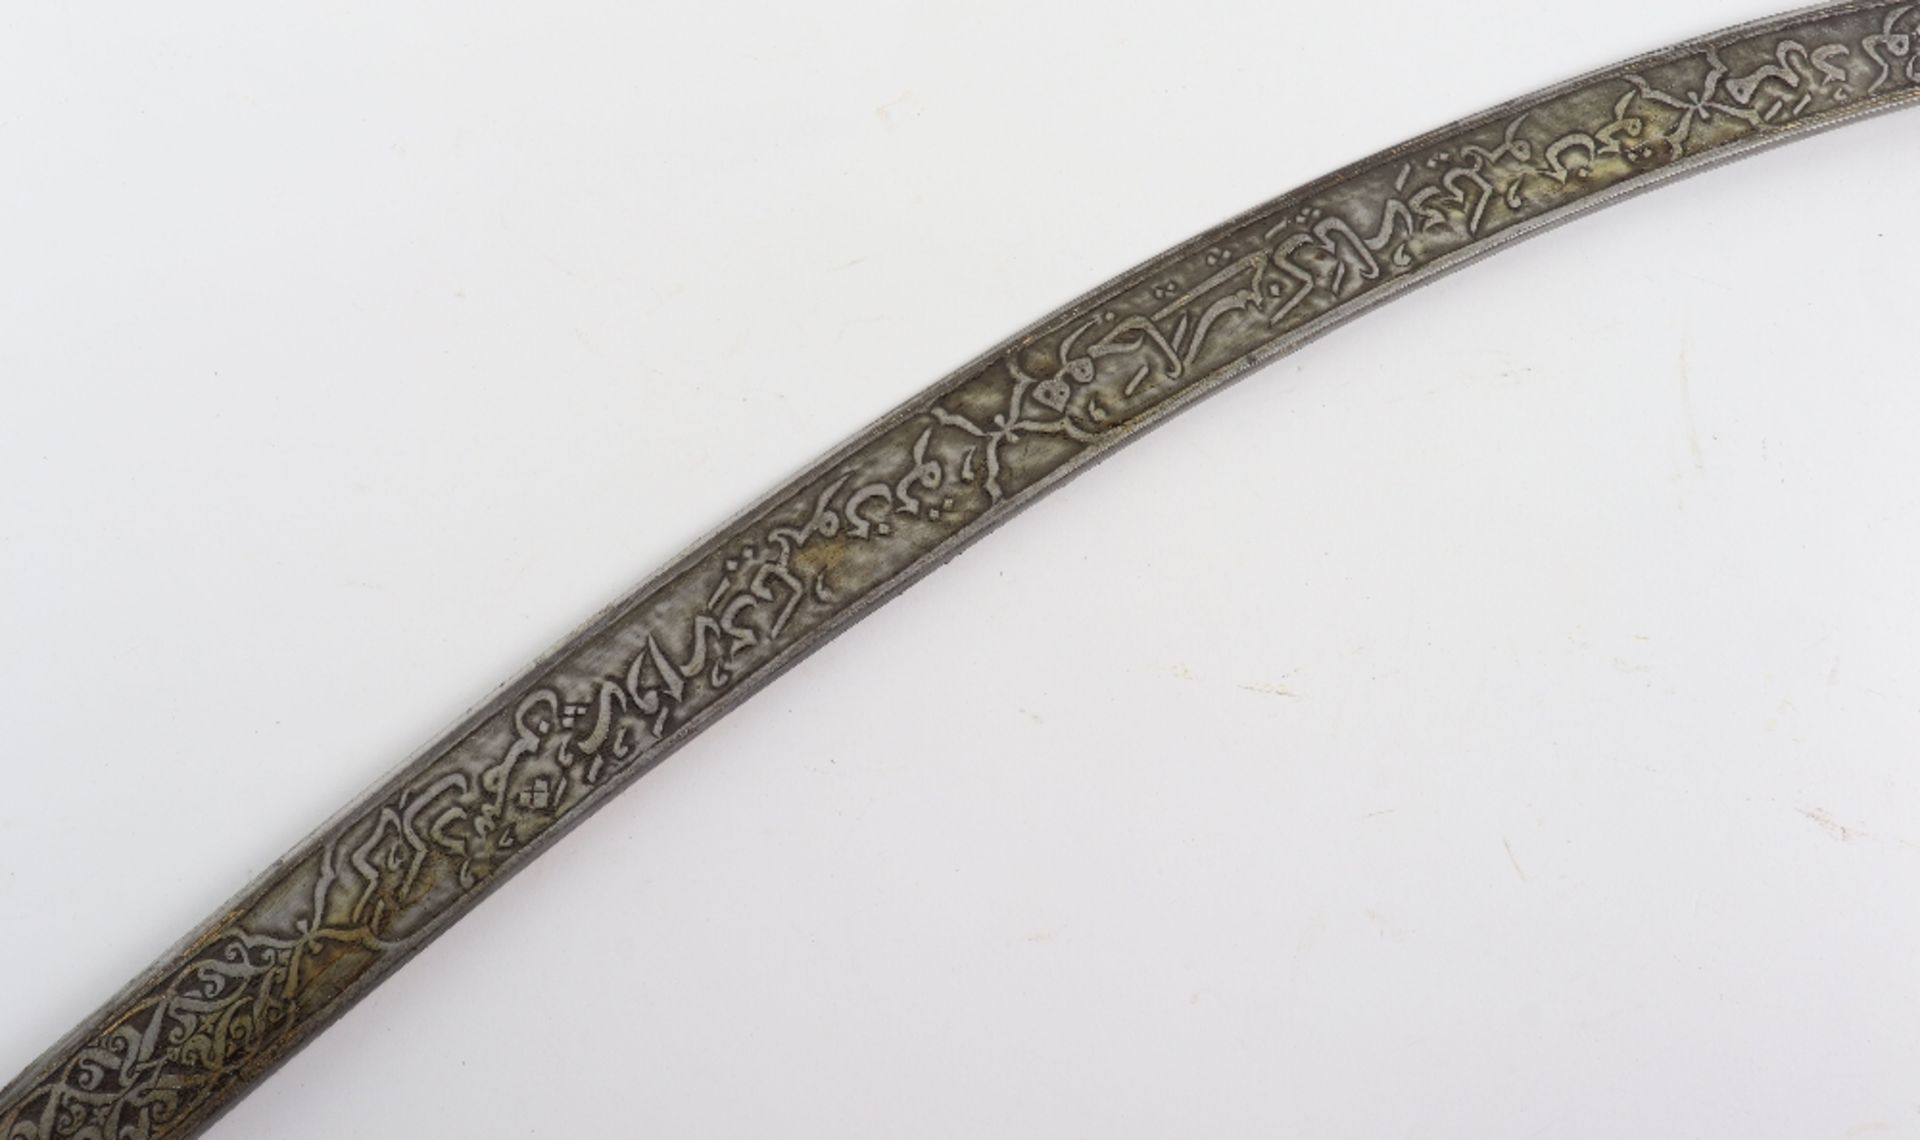 ^ North Indian Sword Shamshir Built for an Officer, Second Half of the 19th Century - Image 7 of 15